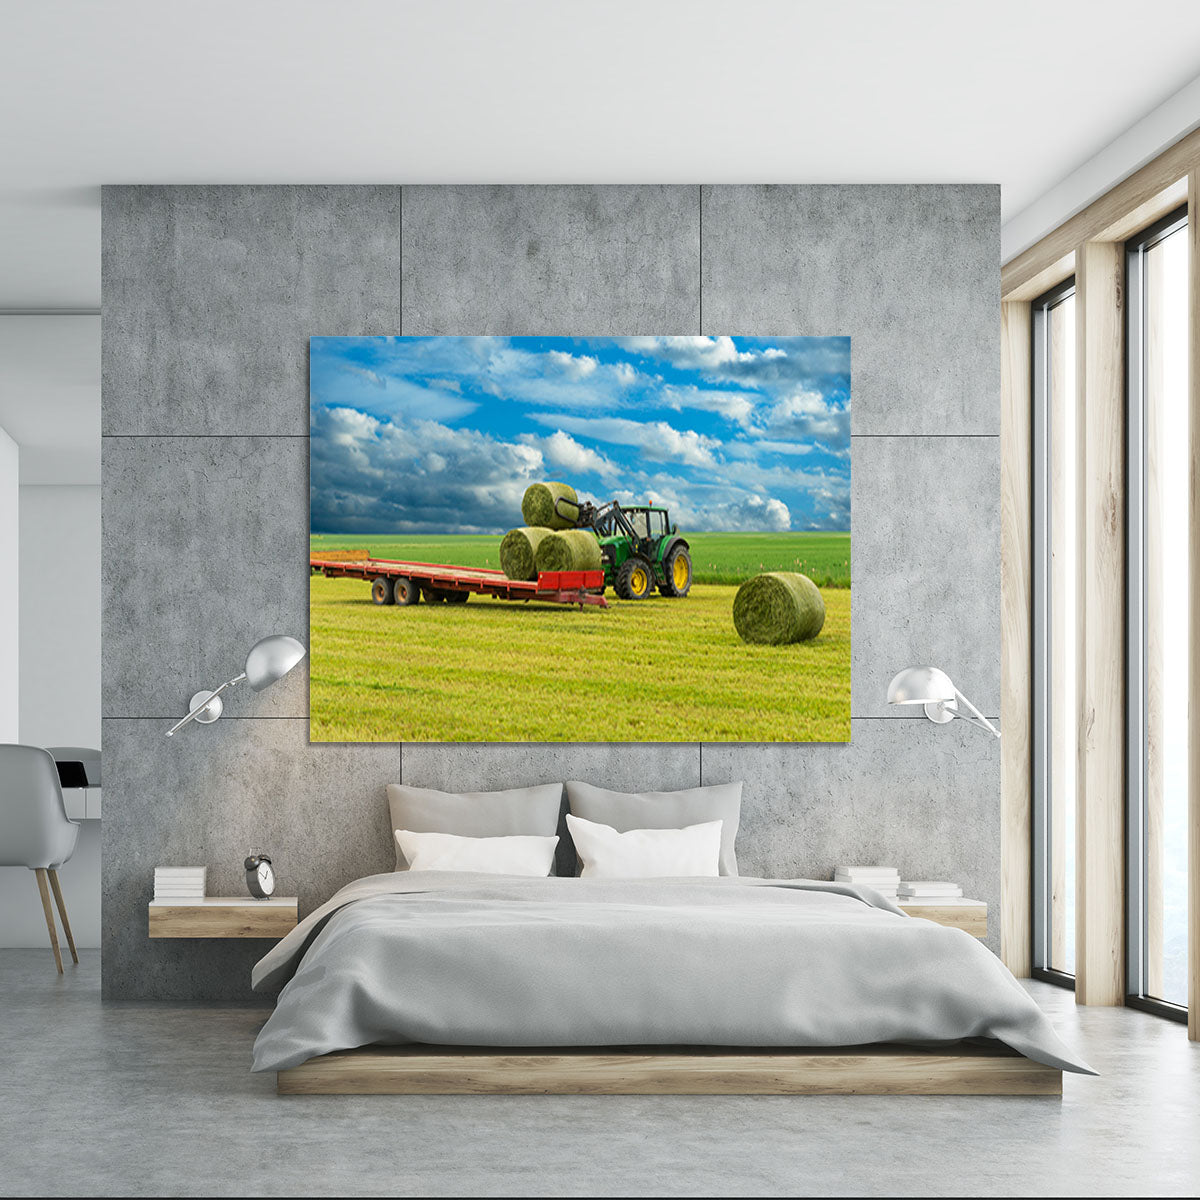 Tractor and trailer with hay bales Canvas Print or Poster - Canvas Art Rocks - 5